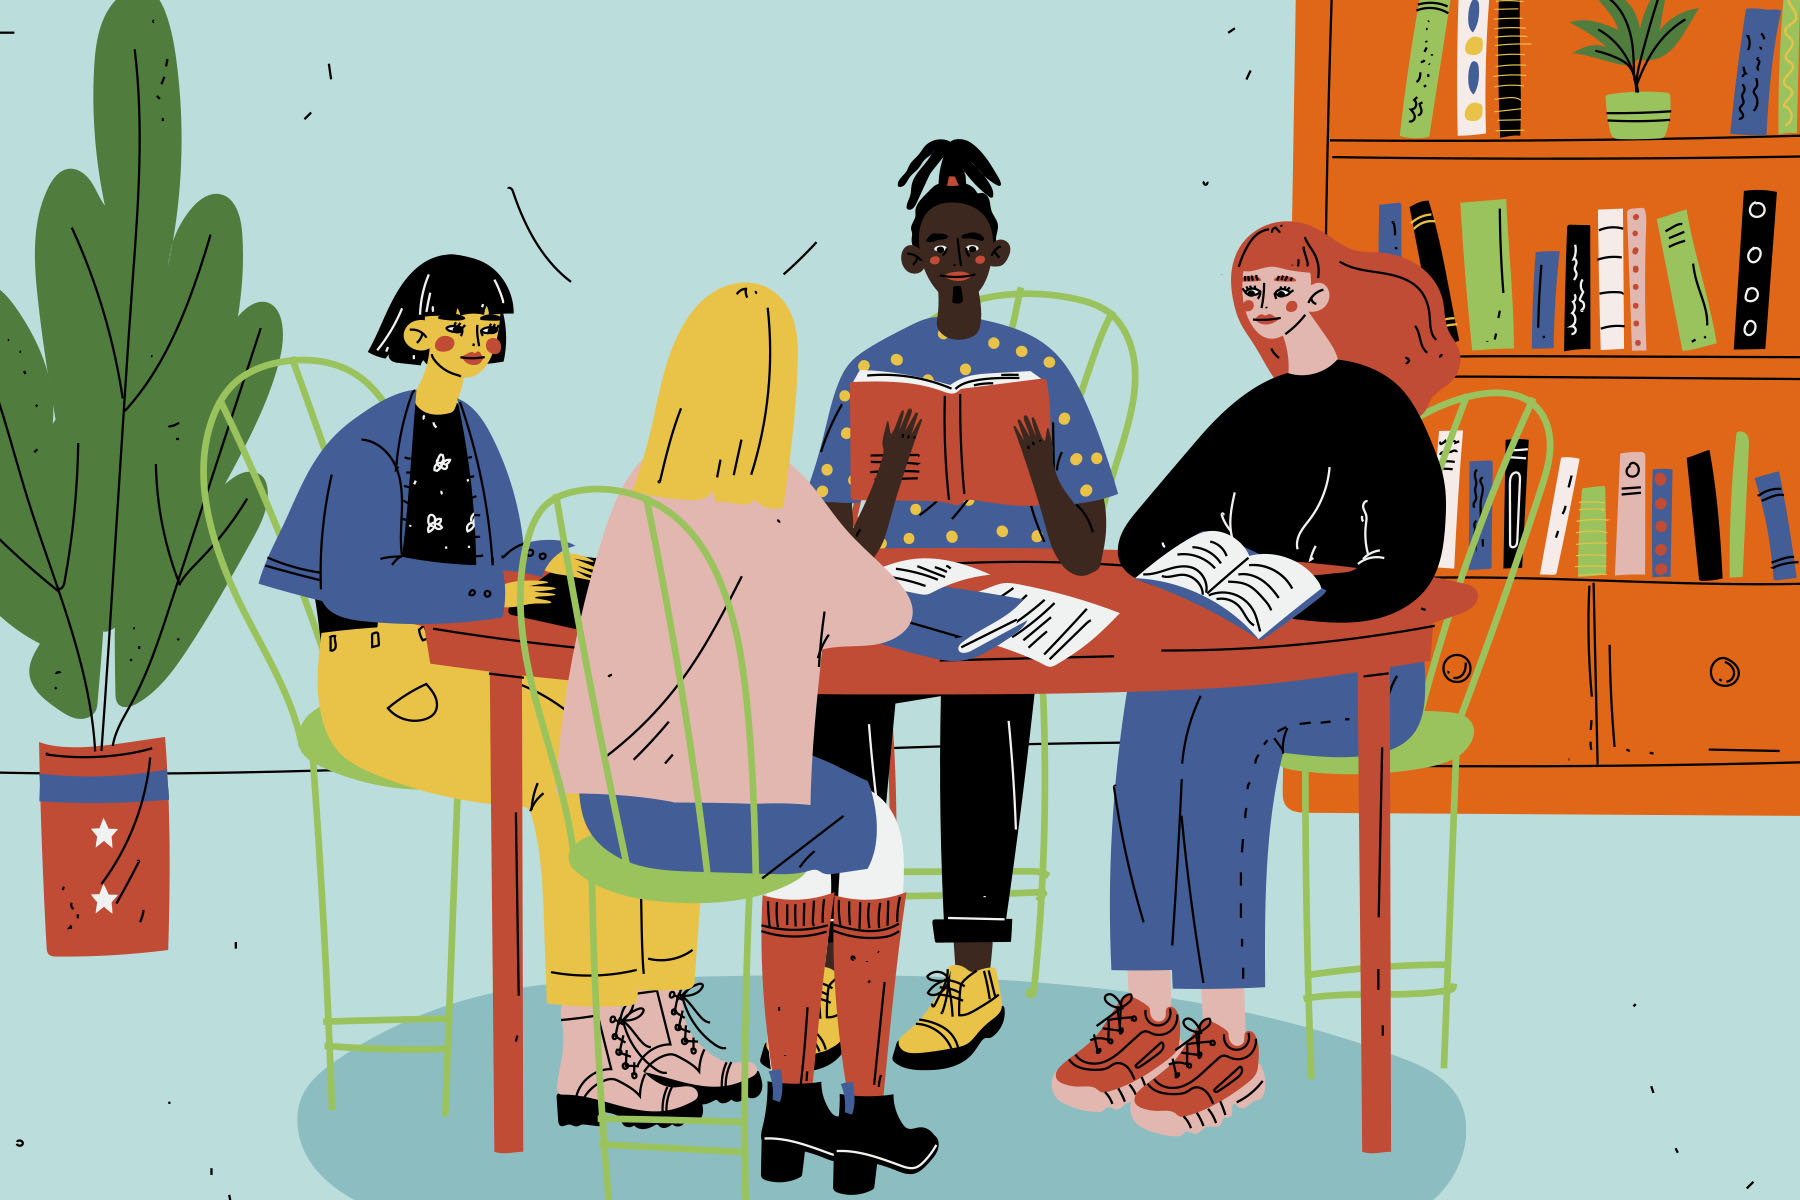 Image of four people sat around a table reading books